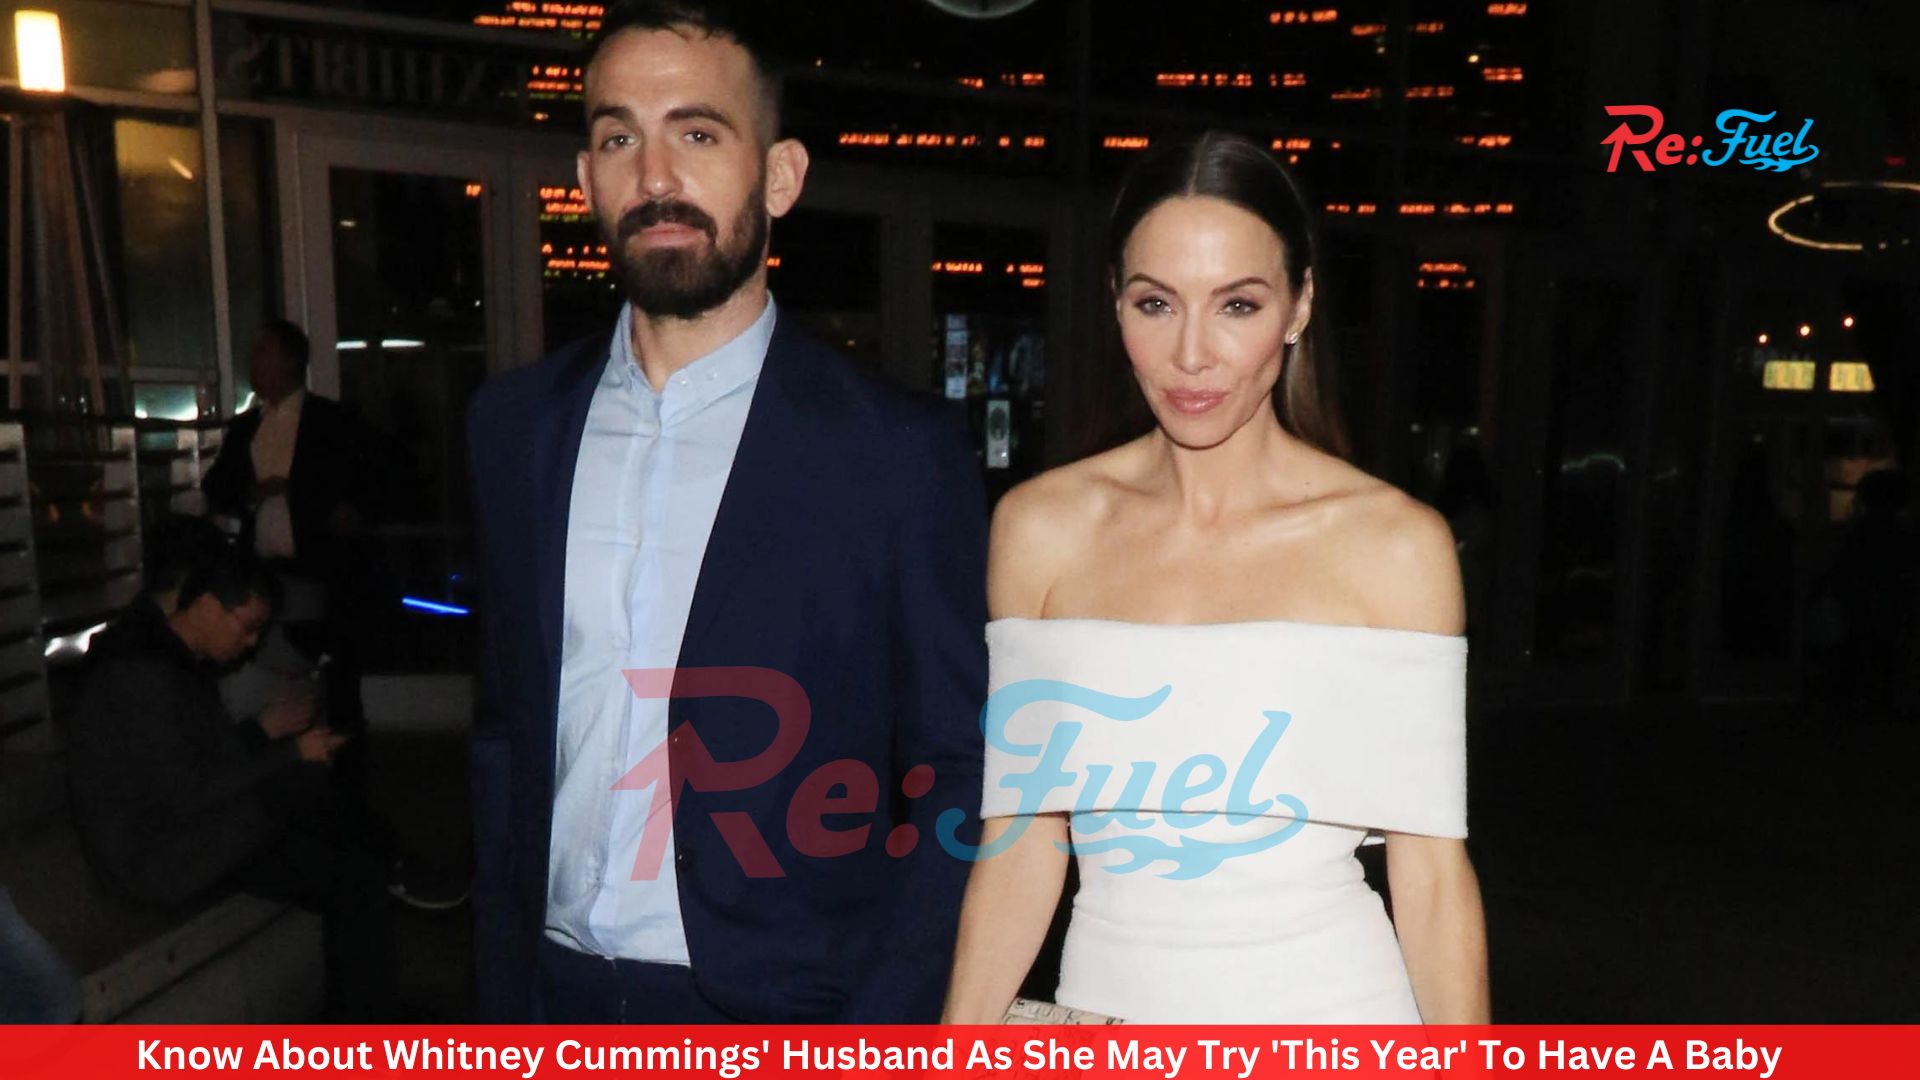 Know About Whitney Cummings' Husband As She May Try 'This Year' To Have A Baby